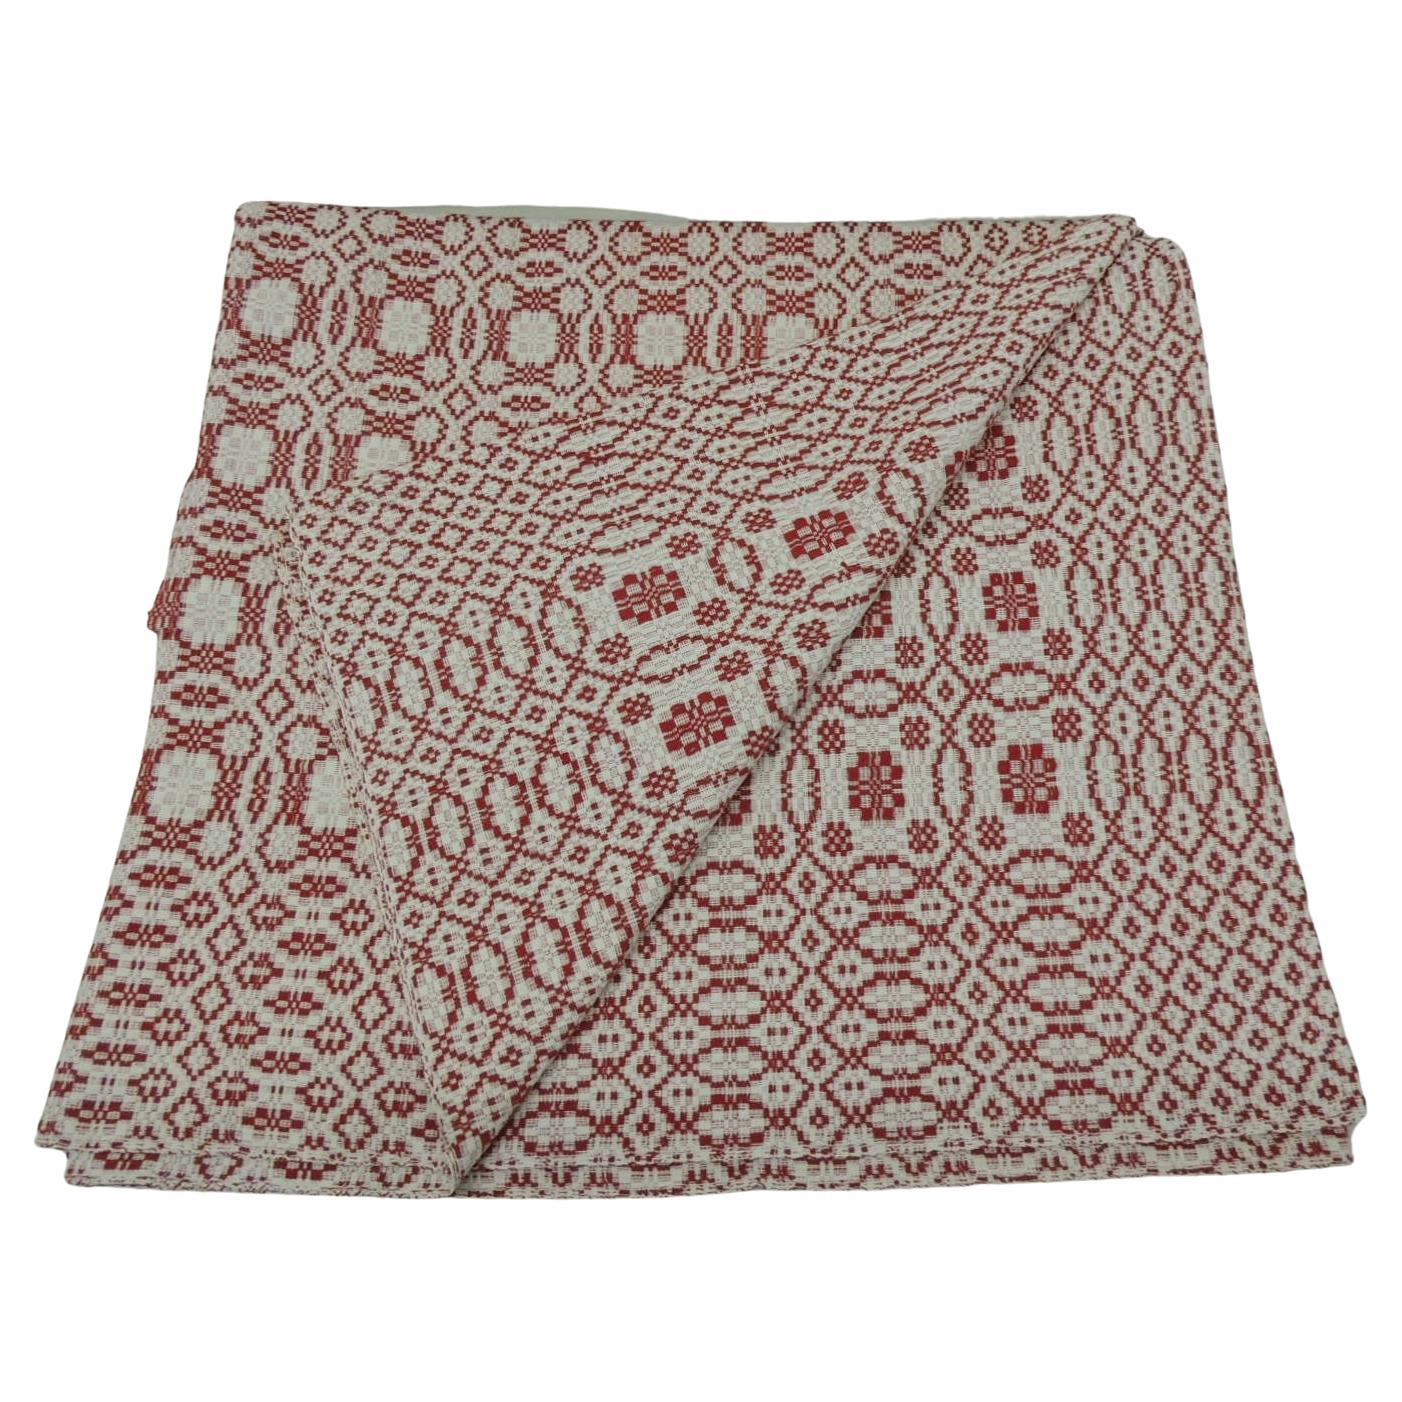 Red and White Americana Jacquard Woven Blanket/Coverlet